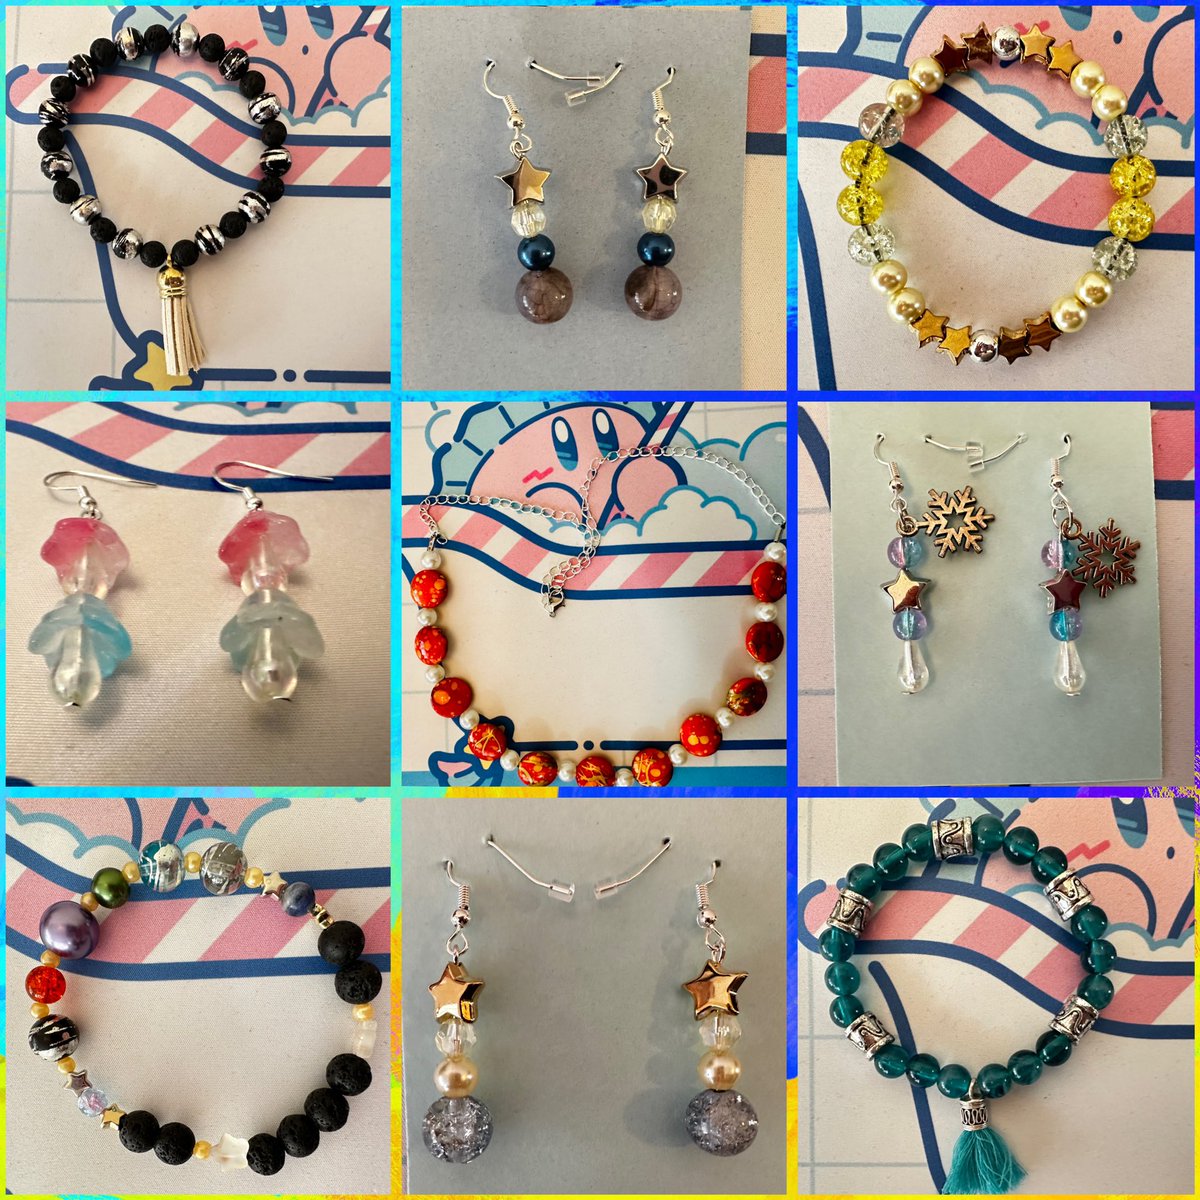 If your in the market 💰for something a little more down ⬇️to earth 🌍or cute 🎀and colourful 🌈isn’t you thing we’ve got you🫵

A wide range of stylish accessories available on my Etsy store come check us out🫶

#etsy #shopsmall #handmade #stylish #cool 

alchemistsaccessory.etsy.com